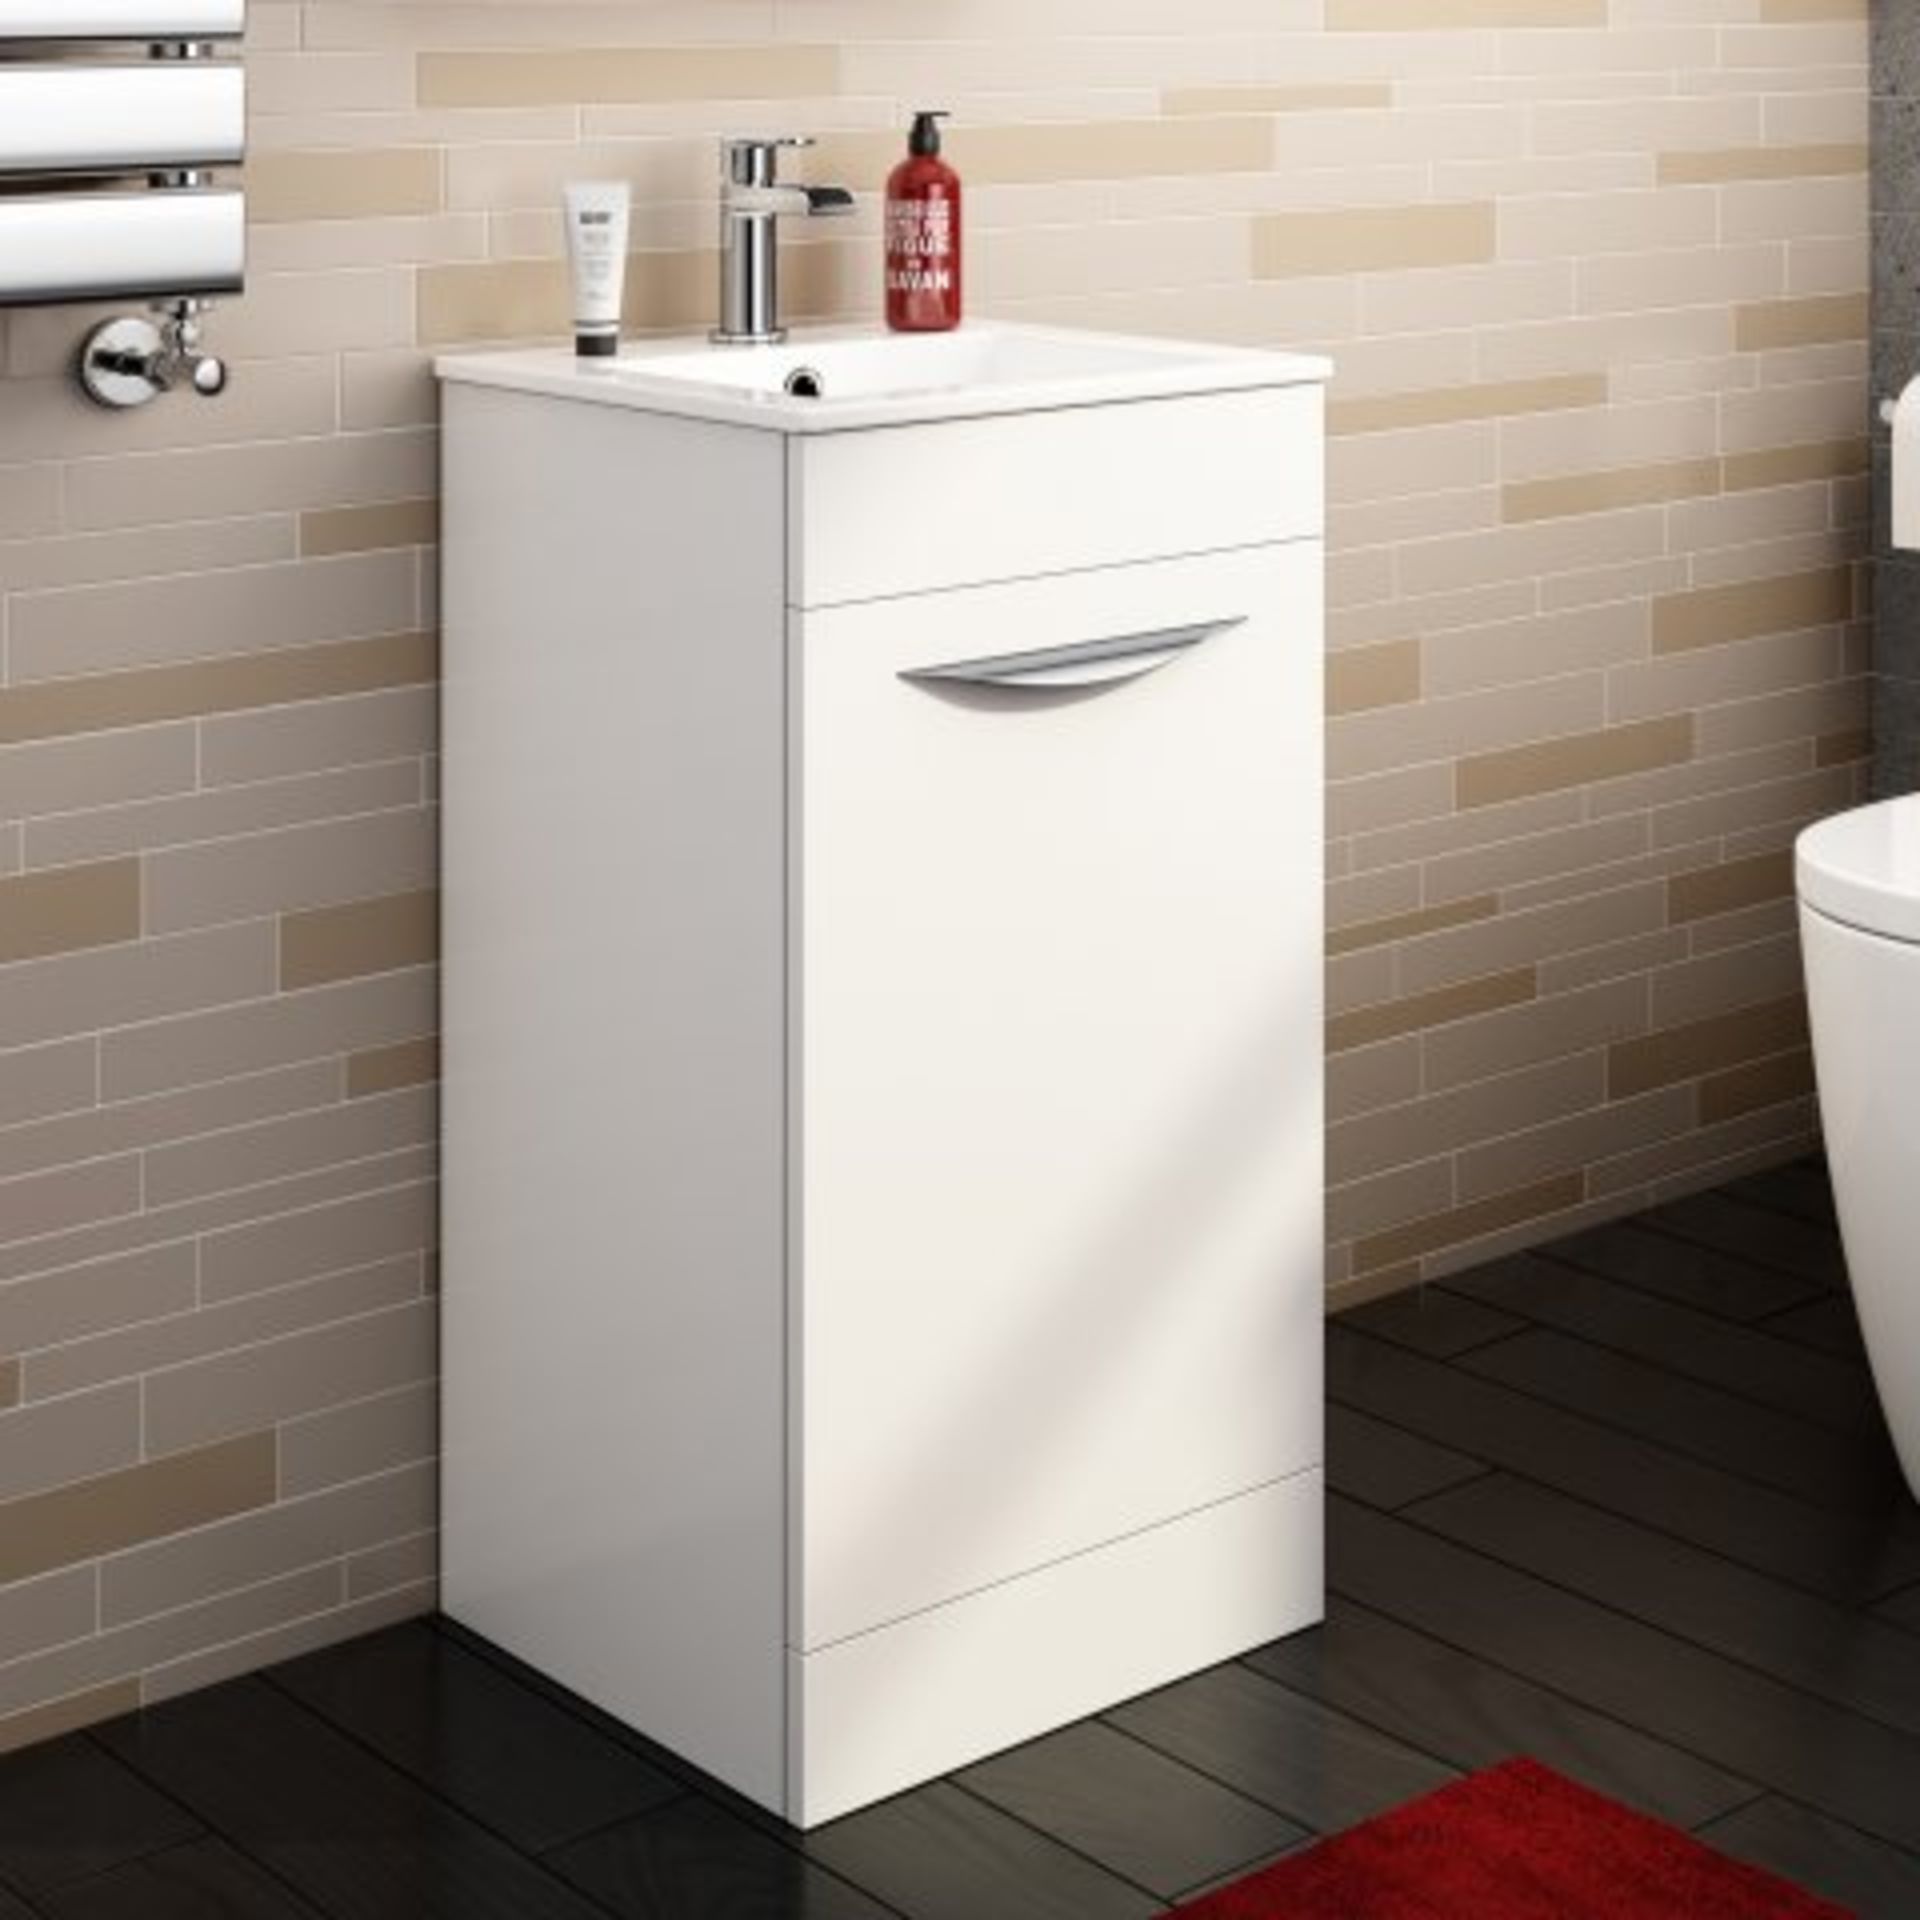 (I60) 400mm Severn High Gloss White Cloakroom Basin Cabinet - Floor Standing. RRP £212.99. COMES